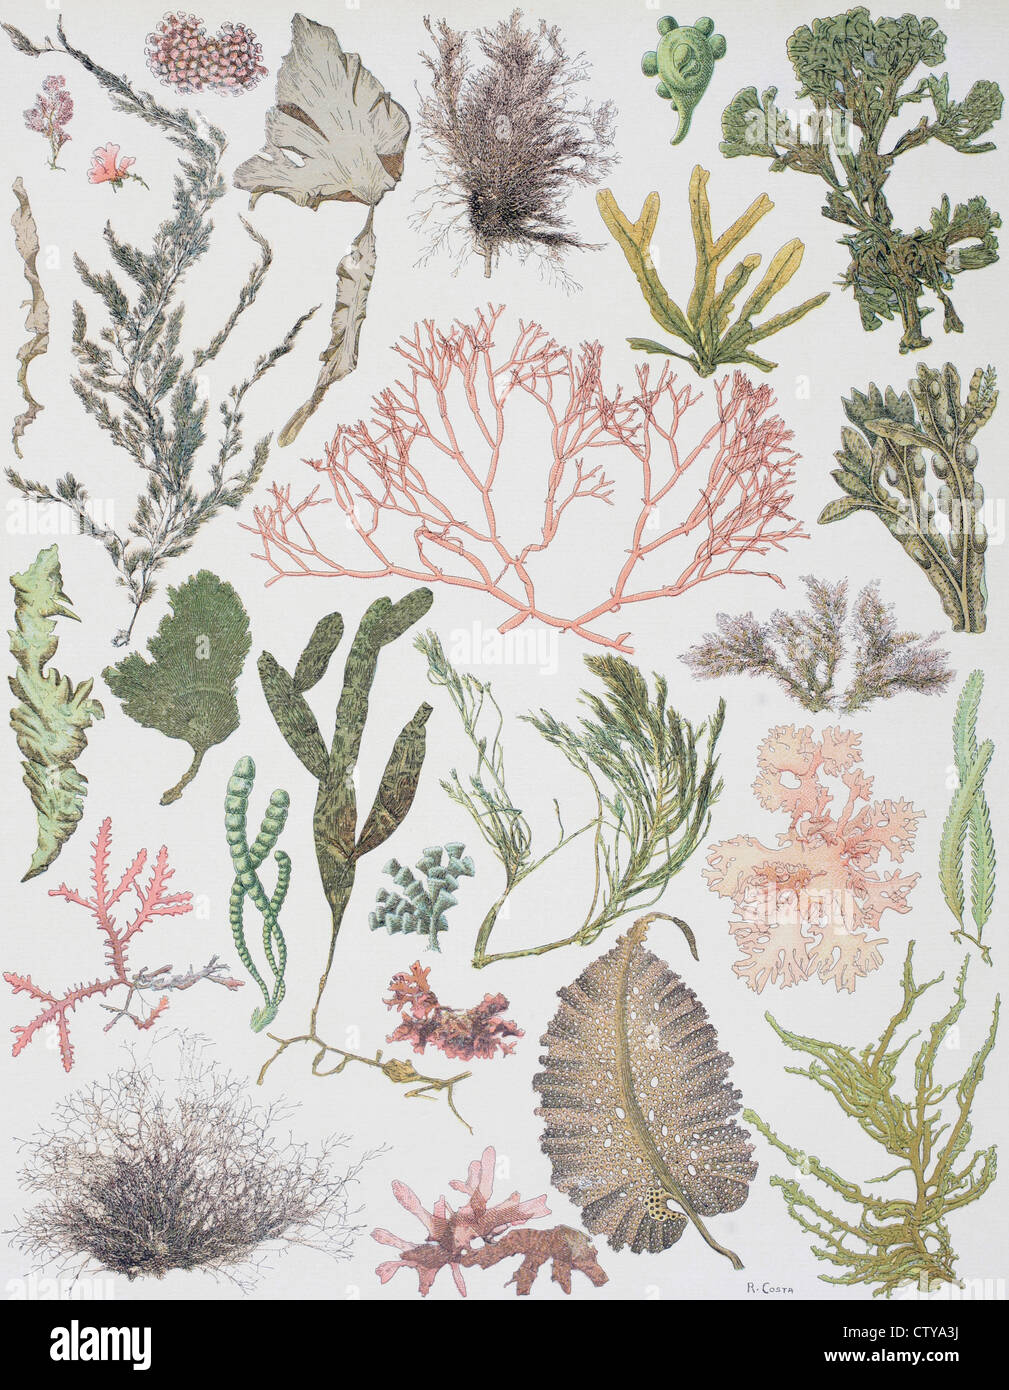 Different strains of seaweed. From Enciclopedia Ilustrada Seguí, published Barcelona circa 1910. Stock Photo